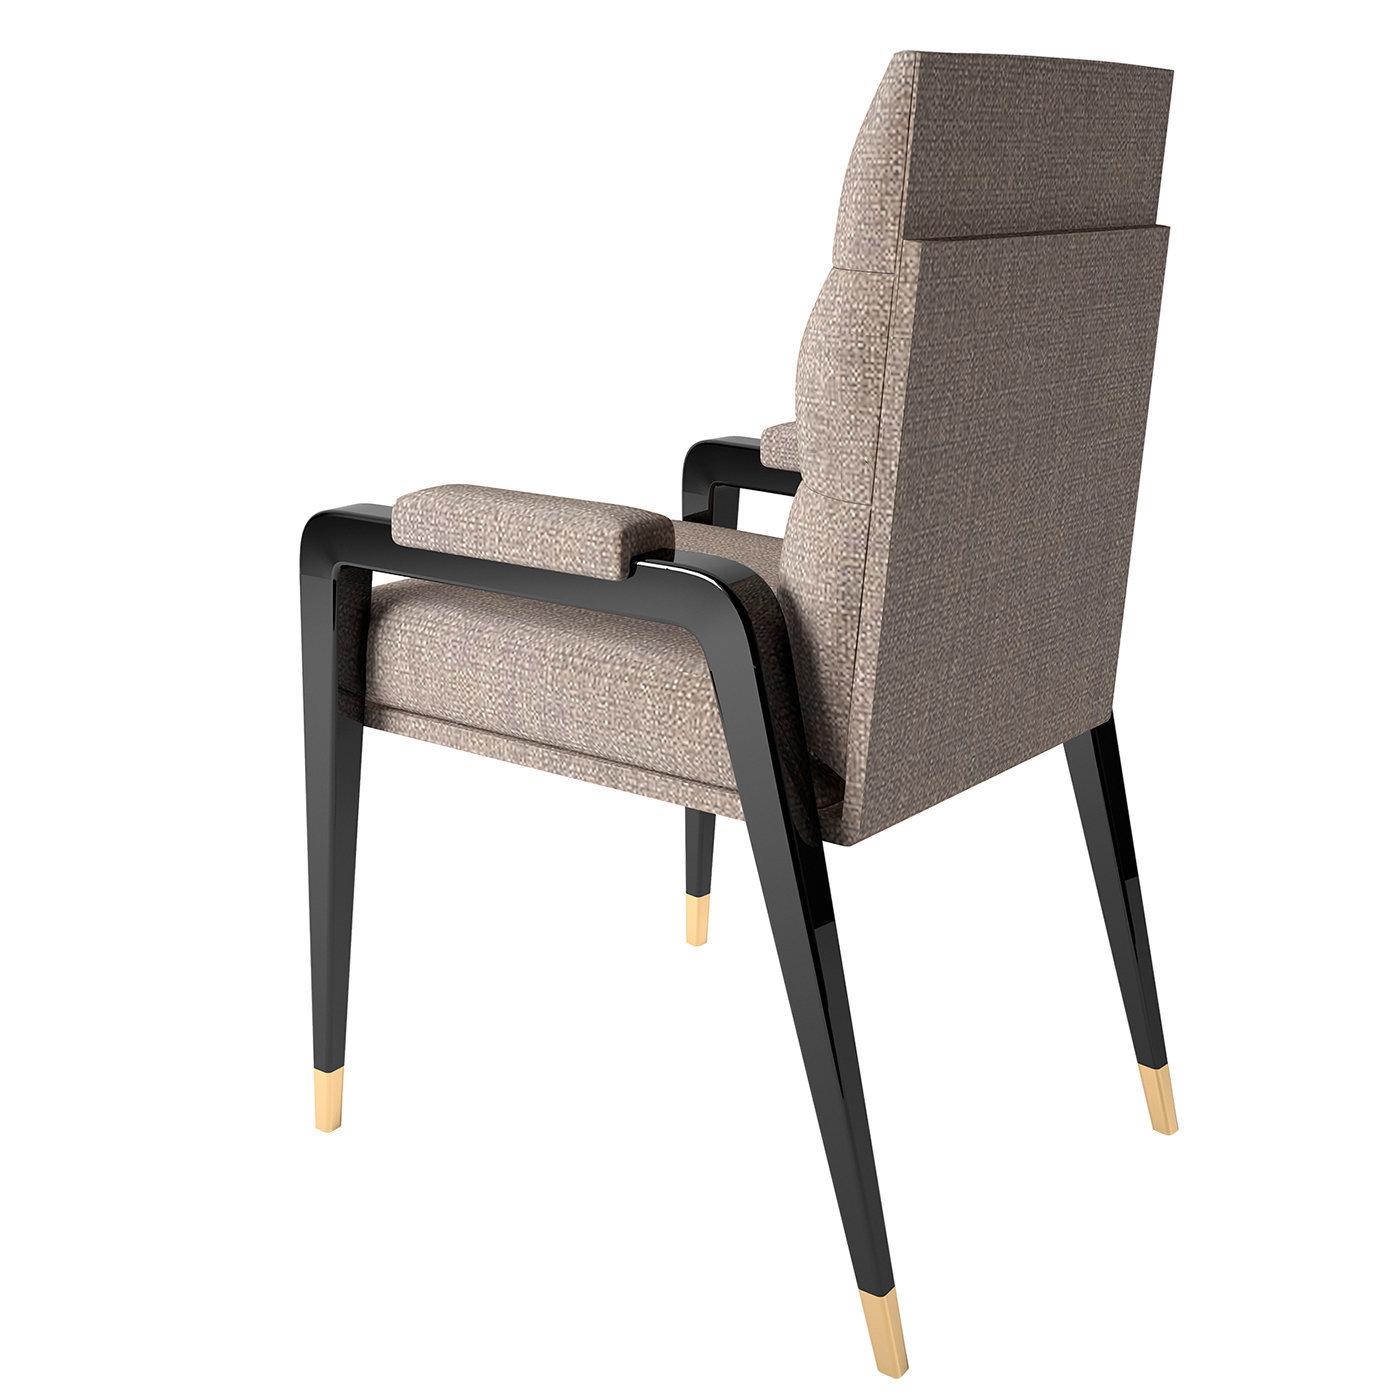 A clean and elegant design of refined sophistication, this chair by Giannella Ventura will infuse any modern interior with a timeless charm. Resting on a shiny black structure enriched with polished brass details, it features a gray